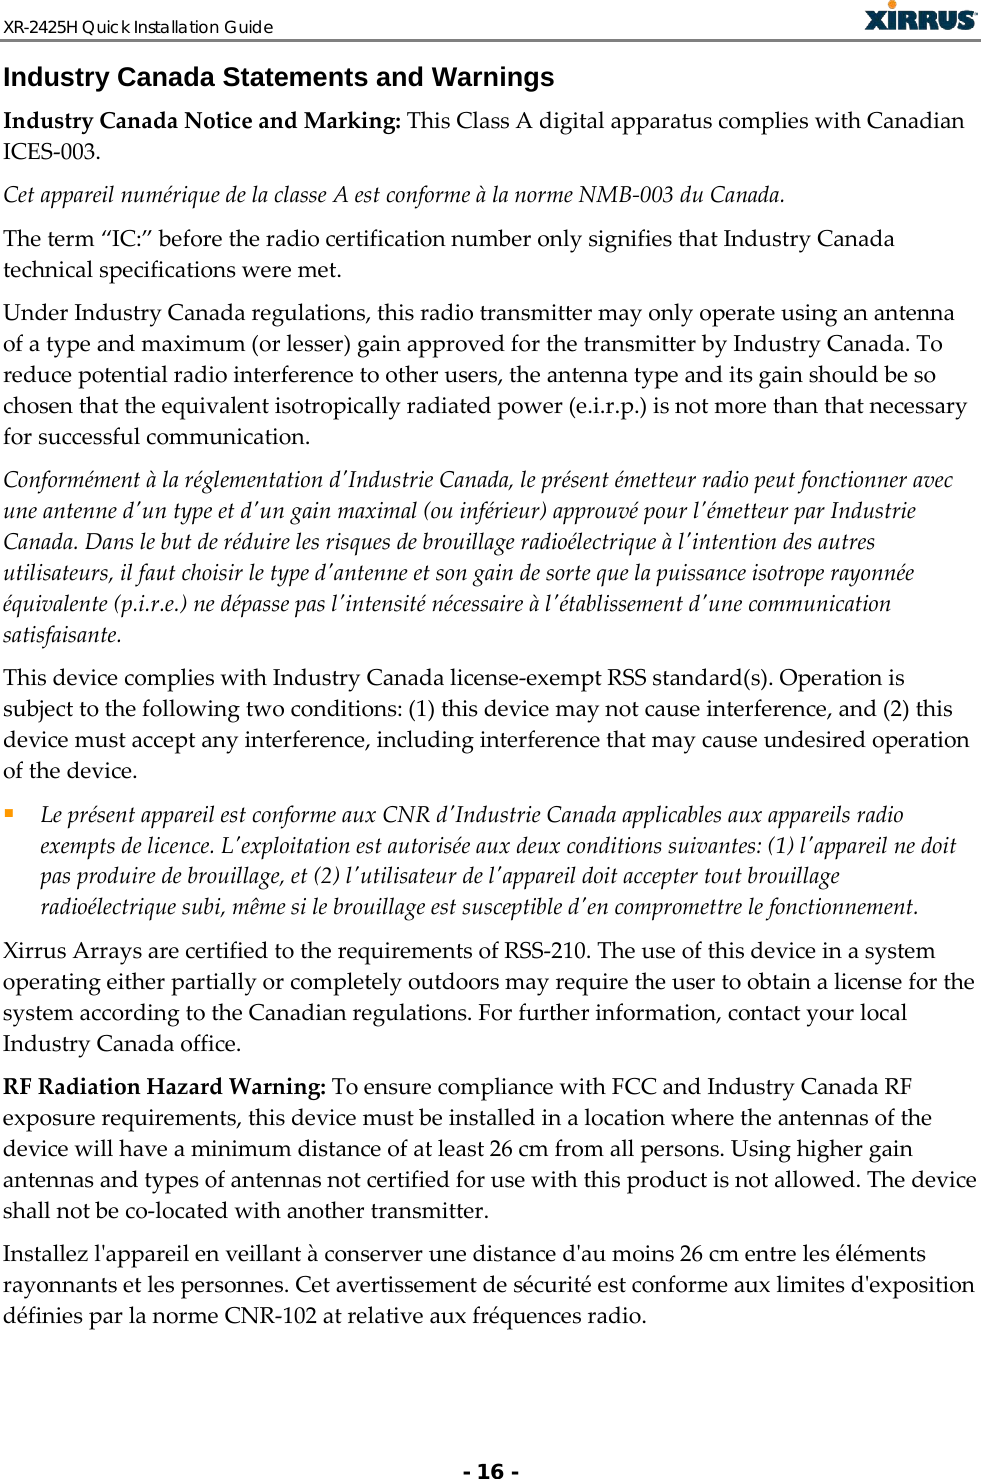 XR-2425H Quick Installation Guide   - 16 - Industry Canada Statements and Warnings Industry Canada Notice and Marking: This Class A digital apparatus complies with Canadian ICES-003. Cet appareil numérique de la classe A est conforme à la norme NMB-003 du Canada. The term “IC:” before the radio certification number only signifies that Industry Canada technical specifications were met. Under Industry Canada regulations, this radio transmitter may only operate using an antenna of a type and maximum (or lesser) gain approved for the transmitter by Industry Canada. To reduce potential radio interference to other users, the antenna type and its gain should be so chosen that the equivalent isotropically radiated power (e.i.r.p.) is not more than that necessary for successful communication. Conformément à la réglementation d&apos;Industrie Canada, le présent émetteur radio peut fonctionner avec une antenne d&apos;un type et d&apos;un gain maximal (ou inférieur) approuvé pour l&apos;émetteur par Industrie Canada. Dans le but de réduire les risques de brouillage radioélectrique à l&apos;intention des autres utilisateurs, il faut choisir le type d&apos;antenne et son gain de sorte que la puissance isotrope rayonnée équivalente (p.i.r.e.) ne dépasse pas l&apos;intensité nécessaire à l&apos;établissement d&apos;une communication satisfaisante. This device complies with Industry Canada license-exempt RSS standard(s). Operation is subject to the following two conditions: (1) this device may not cause interference, and (2) this device must accept any interference, including interference that may cause undesired operation of the device.  Le présent appareil est conforme aux CNR d&apos;Industrie Canada applicables aux appareils radio exempts de licence. L&apos;exploitation est autorisée aux deux conditions suivantes: (1) l&apos;appareil ne doit pas produire de brouillage, et (2) l&apos;utilisateur de l&apos;appareil doit accepter tout brouillage radioélectrique subi, même si le brouillage est susceptible d&apos;en compromettre le fonctionnement. Xirrus Arrays are certified to the requirements of RSS-210. The use of this device in a system operating either partially or completely outdoors may require the user to obtain a license for the system according to the Canadian regulations. For further information, contact your local Industry Canada office. RF Radiation Hazard Warning: To ensure compliance with FCC and Industry Canada RF exposure requirements, this device must be installed in a location where the antennas of the device will have a minimum distance of at least 26 cm from all persons. Using higher gain antennas and types of antennas not certified for use with this product is not allowed. The device shall not be co-located with another transmitter. Installez l&apos;appareil en veillant à conserver une distance d&apos;au moins 26 cm entre les éléments rayonnants et les personnes. Cet avertissement de sécurité est conforme aux limites d&apos;exposition définies par la norme CNR-102 at relative aux fréquences radio. 